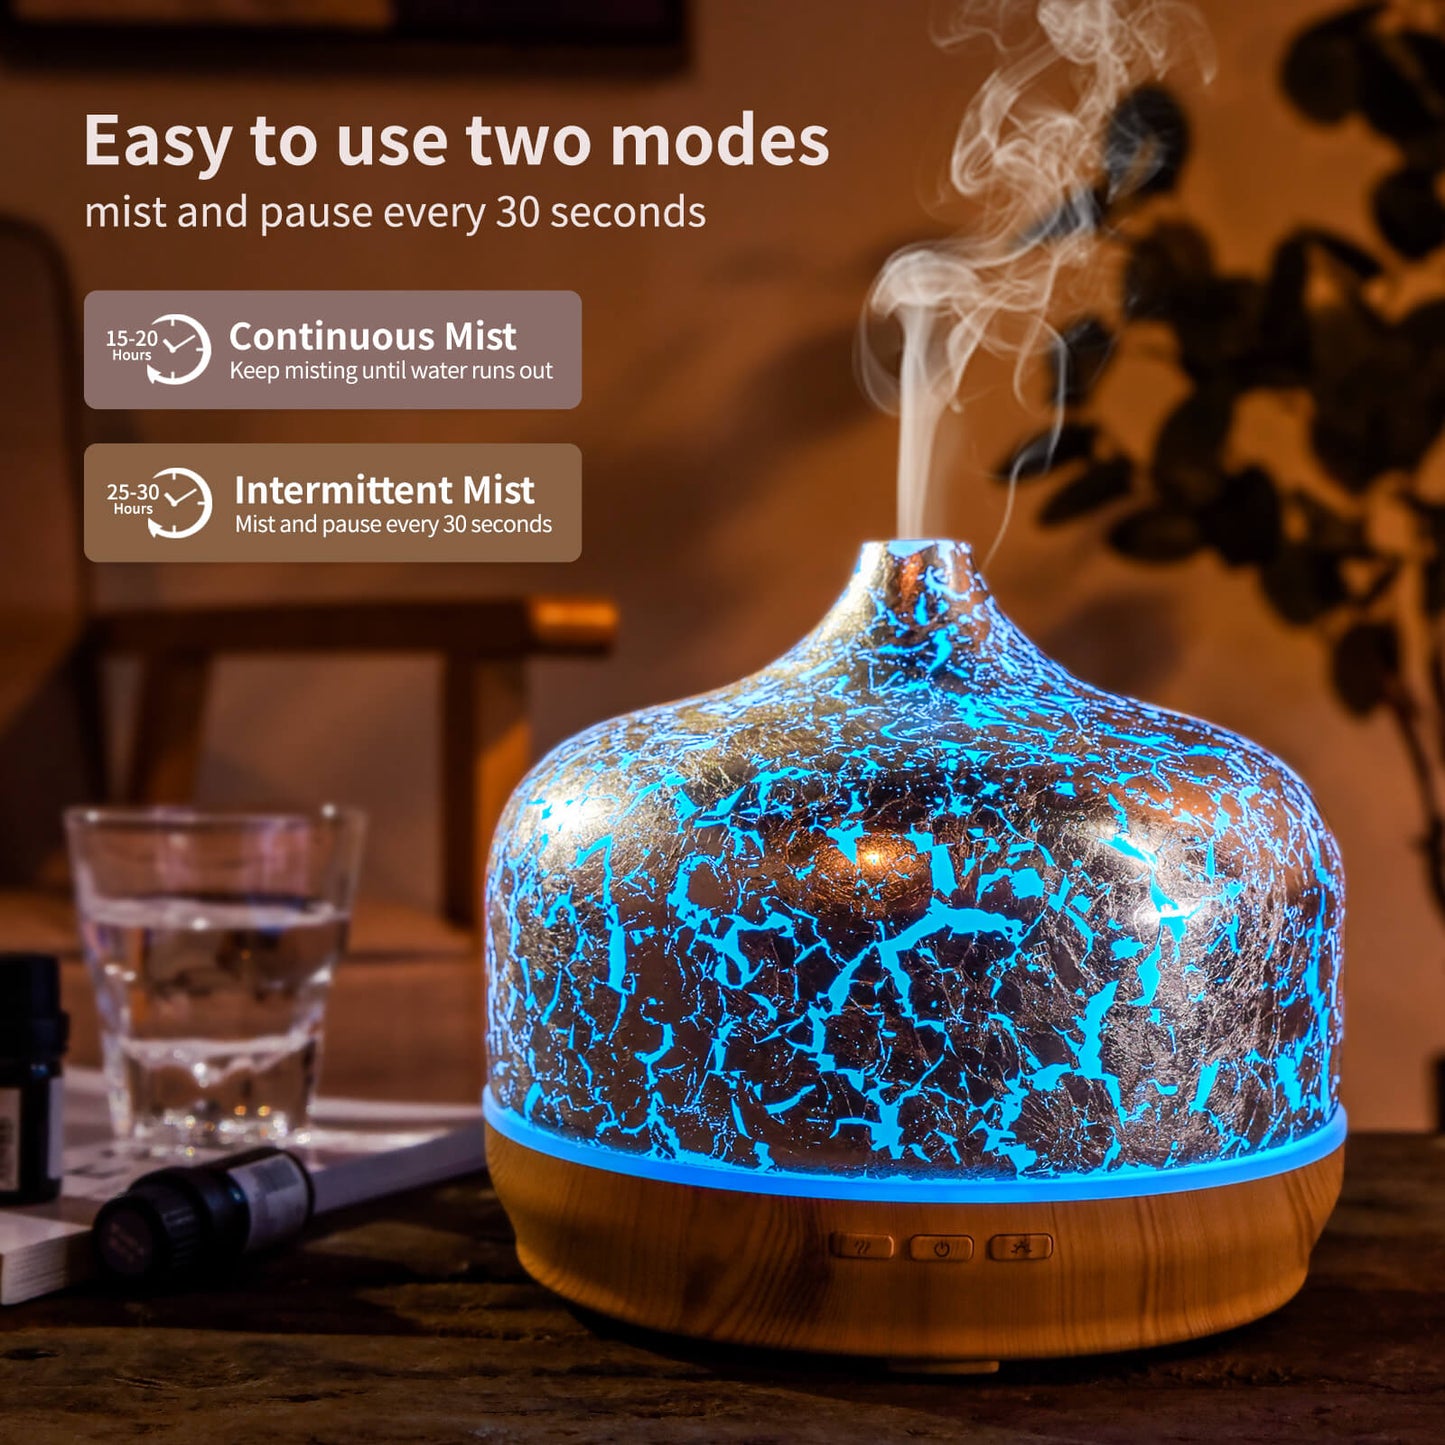 500ml Essential Oil Diffuser Silver Plated Glass Aromatherapy Ultrasonic Humidifier- Auto Shut-Off,Timer Setting, BPA Free for Home Hotel Yoga SPA Gift